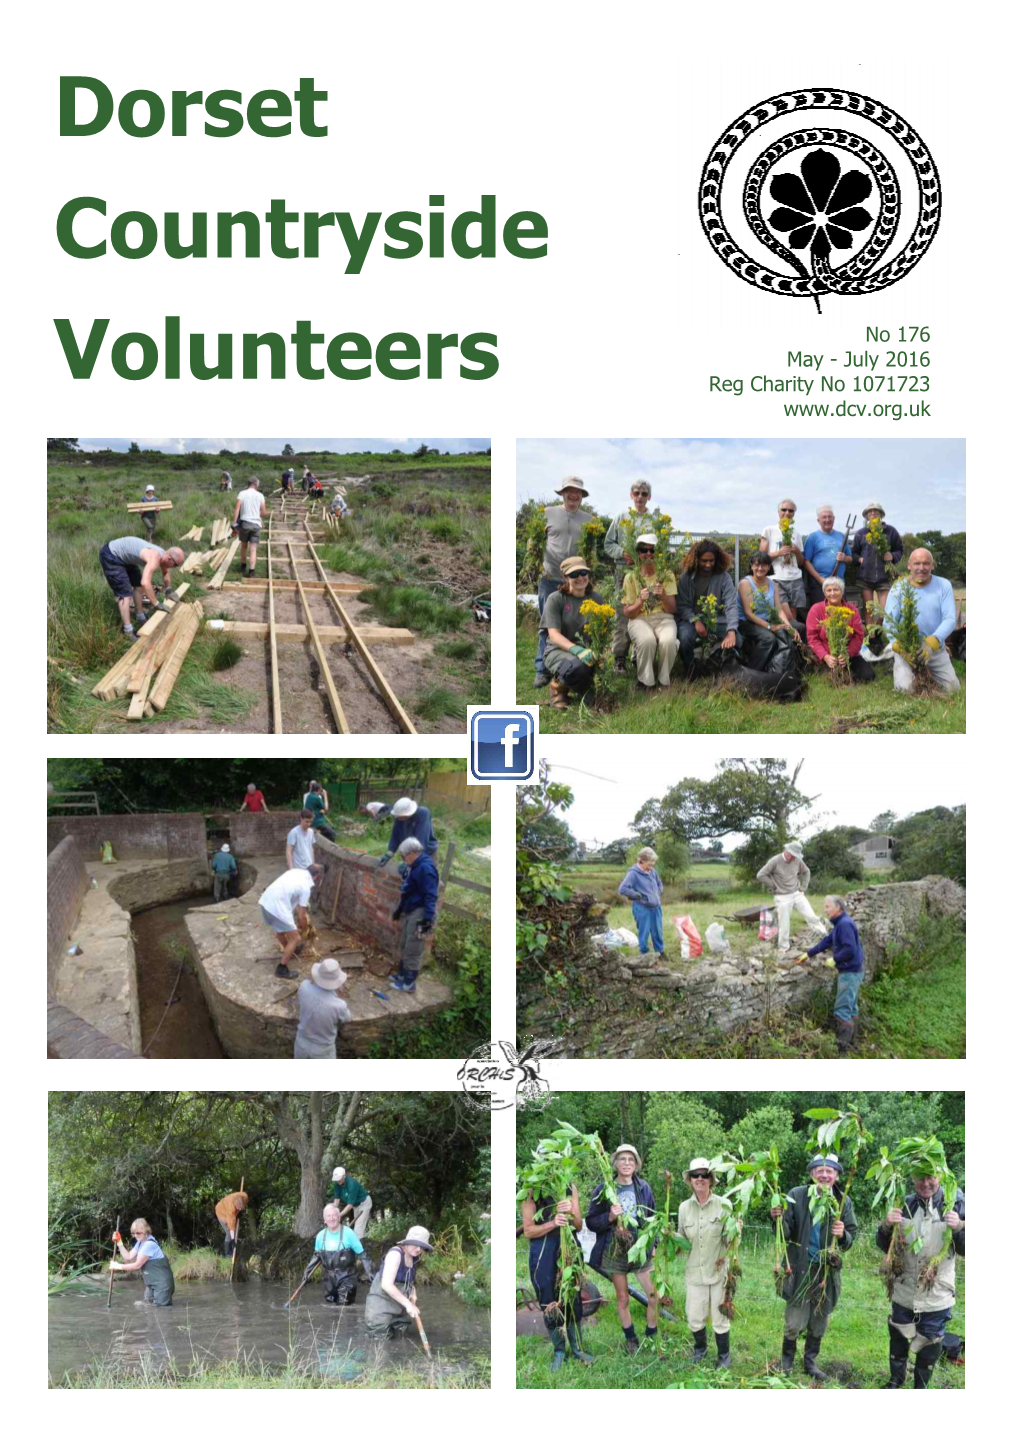 DORSET COUNTRYSIDE VOLUNTEERS in a Contrasting Colour (Typically White) but Not the Logo